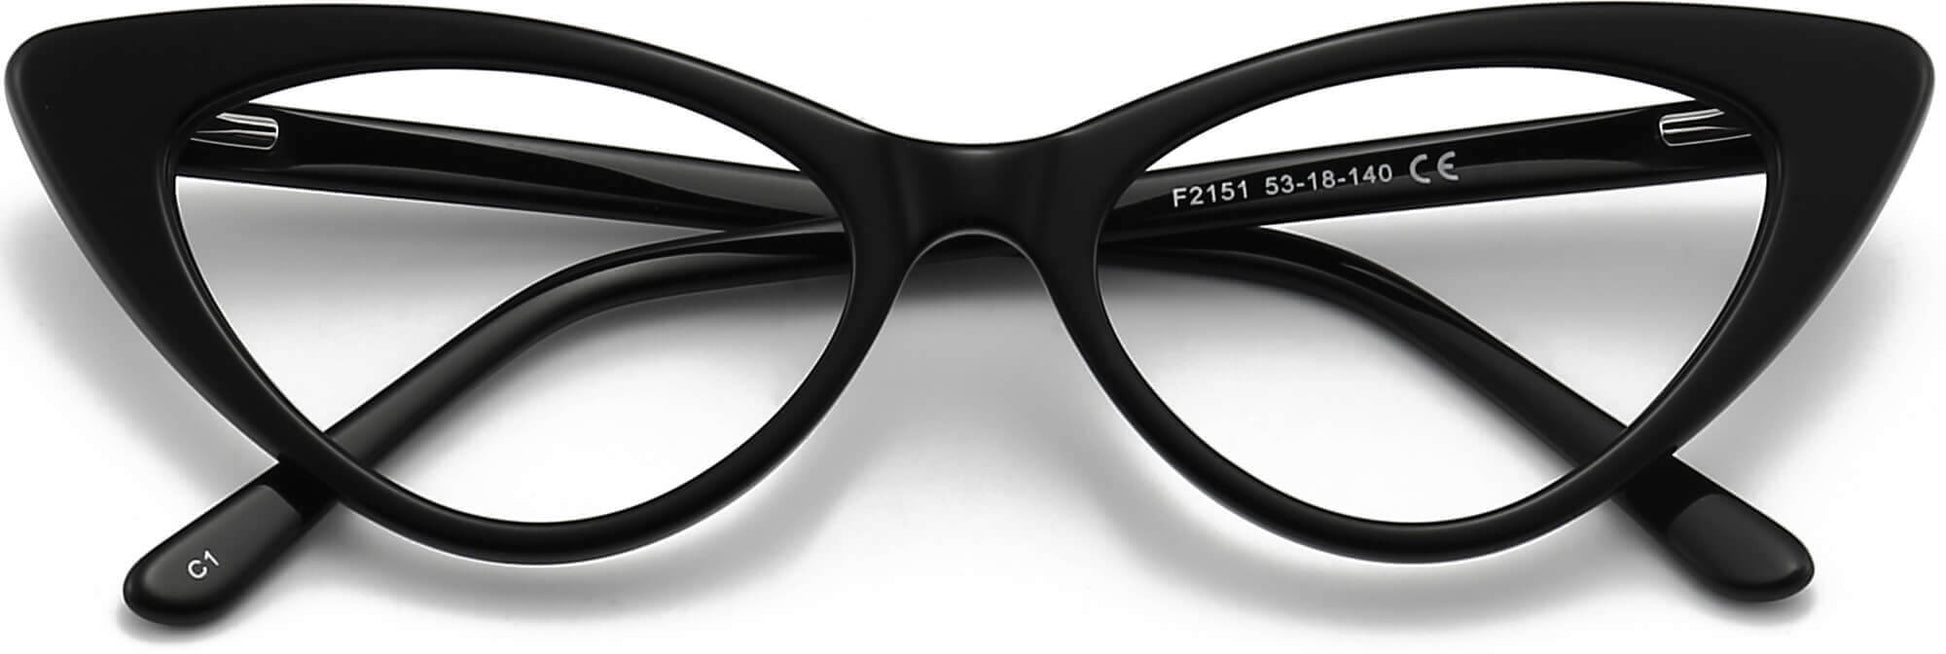 Brielle Cateye Black Eyeglasses from ANRRI, closed view